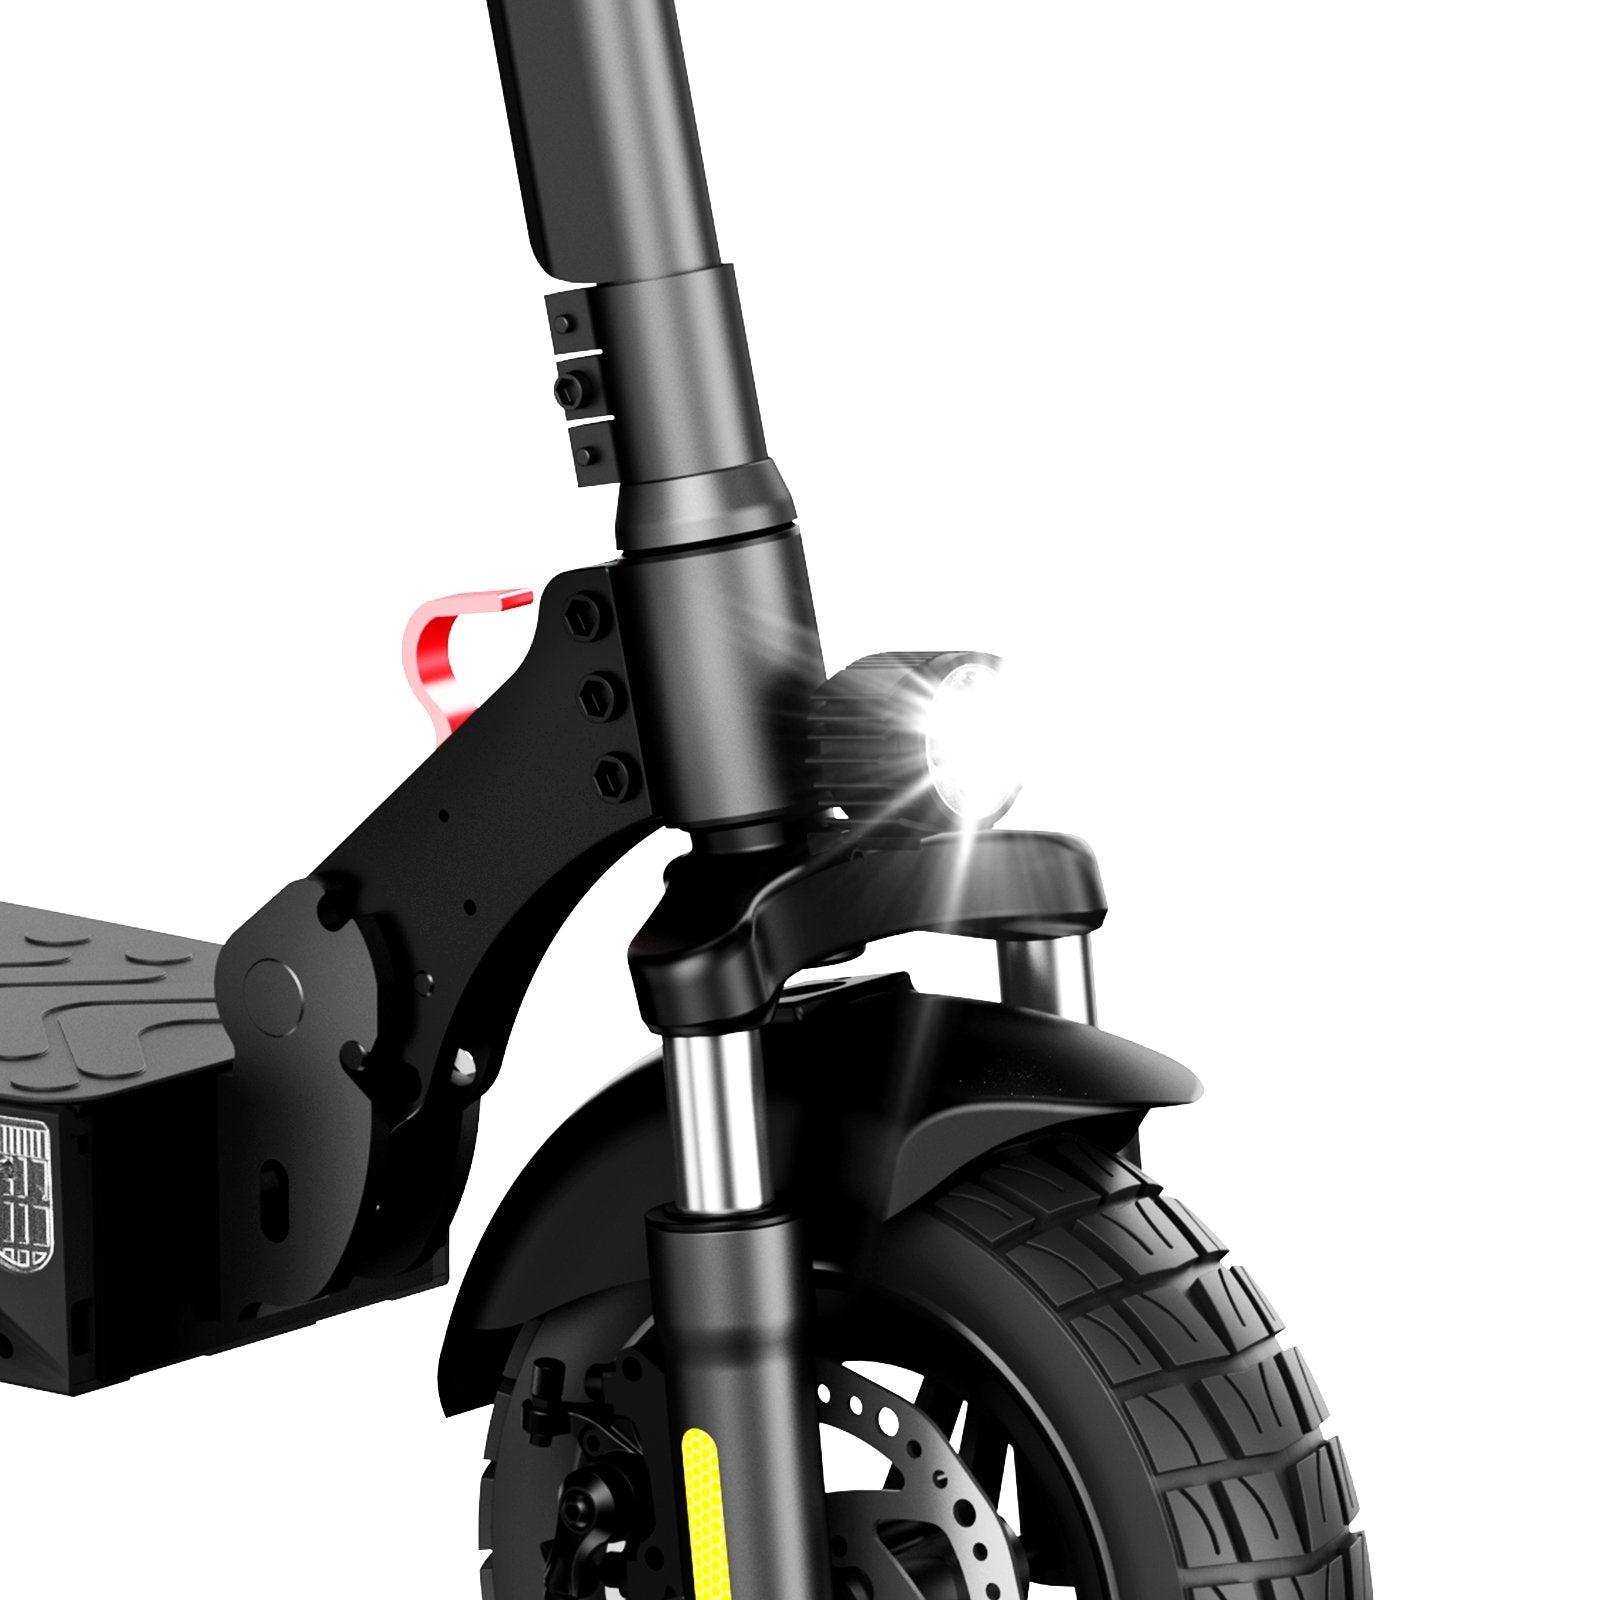 Mate Electric Scooter For Commuting 800W